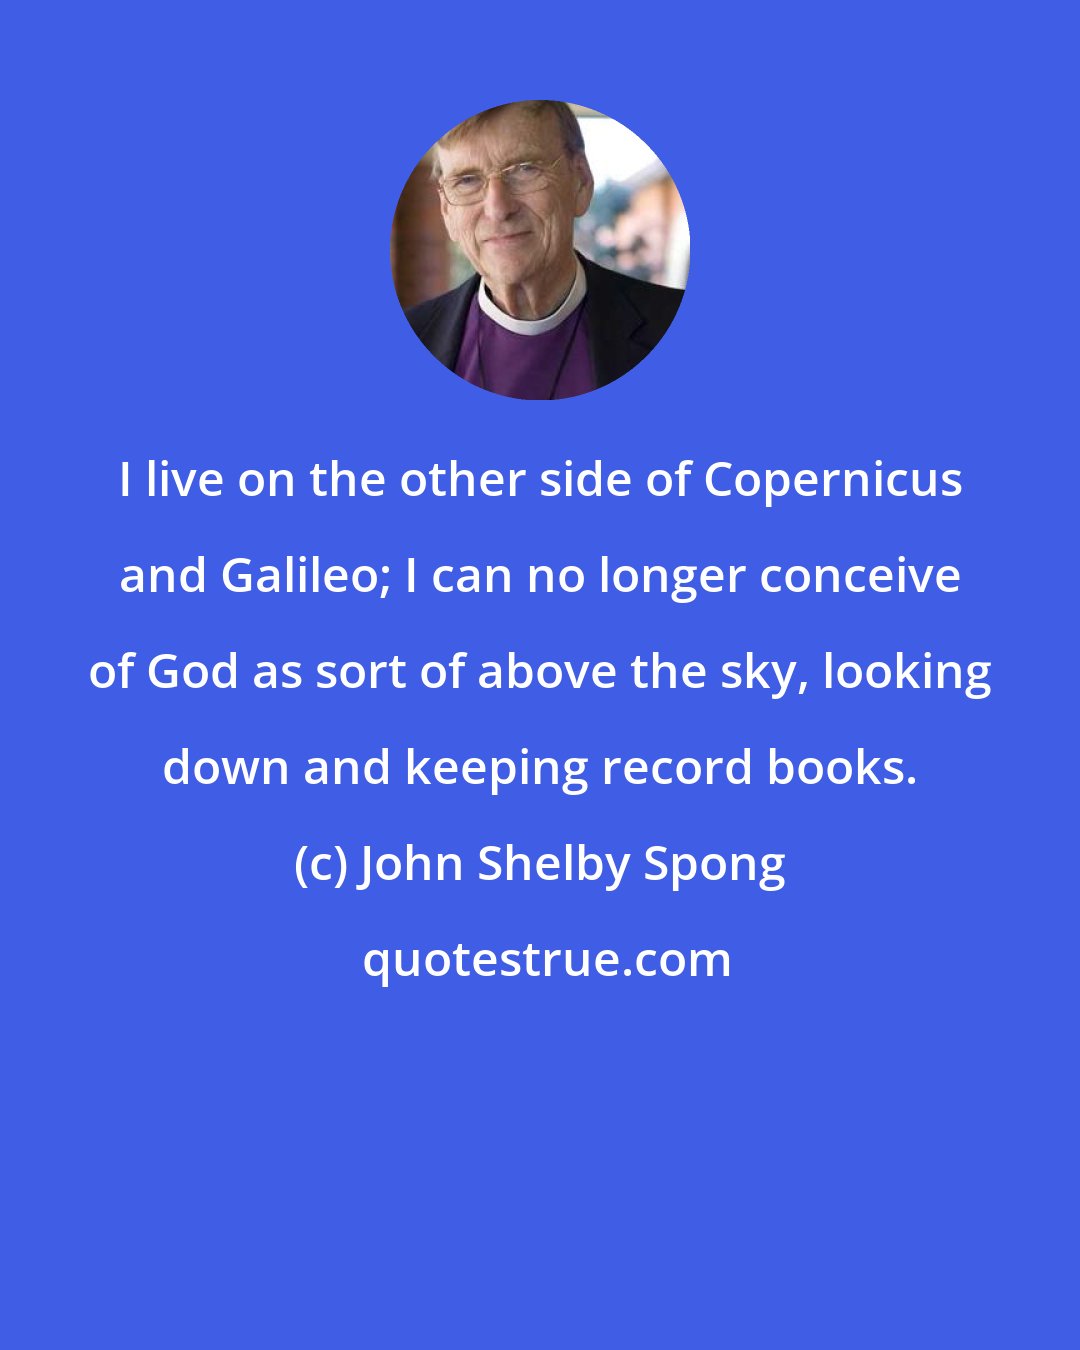 John Shelby Spong: I live on the other side of Copernicus and Galileo; I can no longer conceive of God as sort of above the sky, looking down and keeping record books.